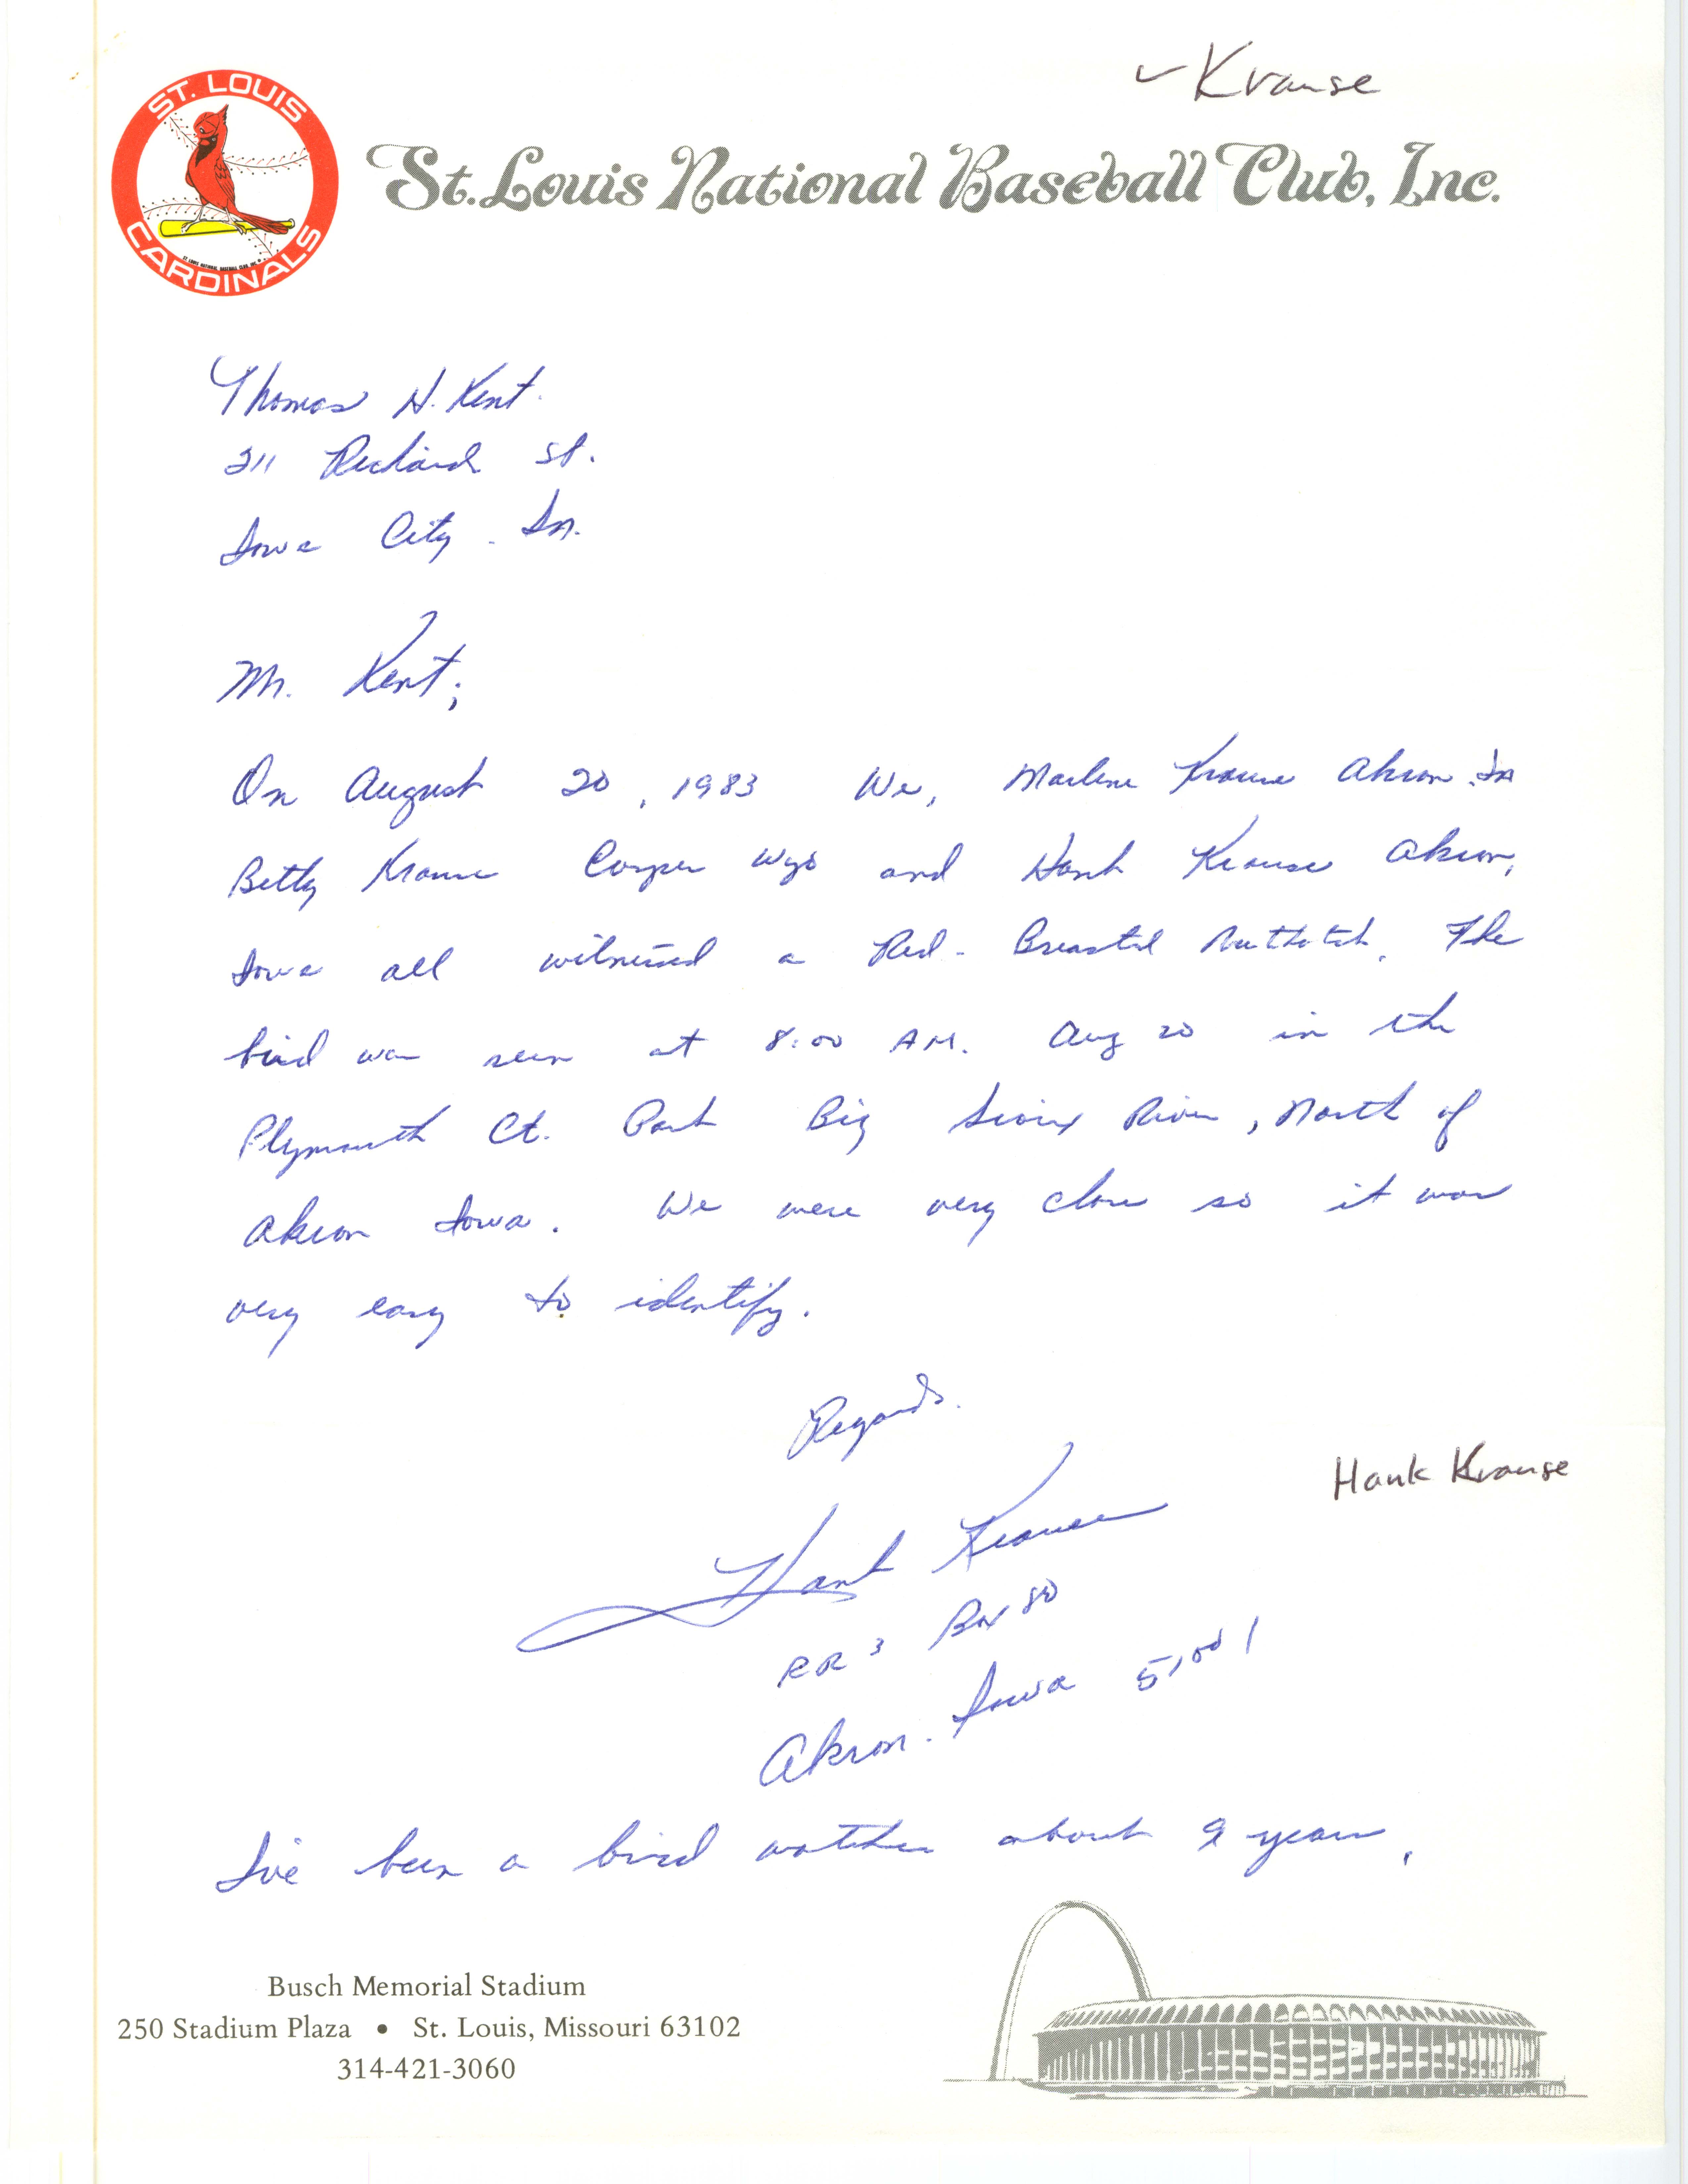 Hank Krause letter to Thomas Kent regarding a Red-breasted Nuthatch sighting, August 20, 1983